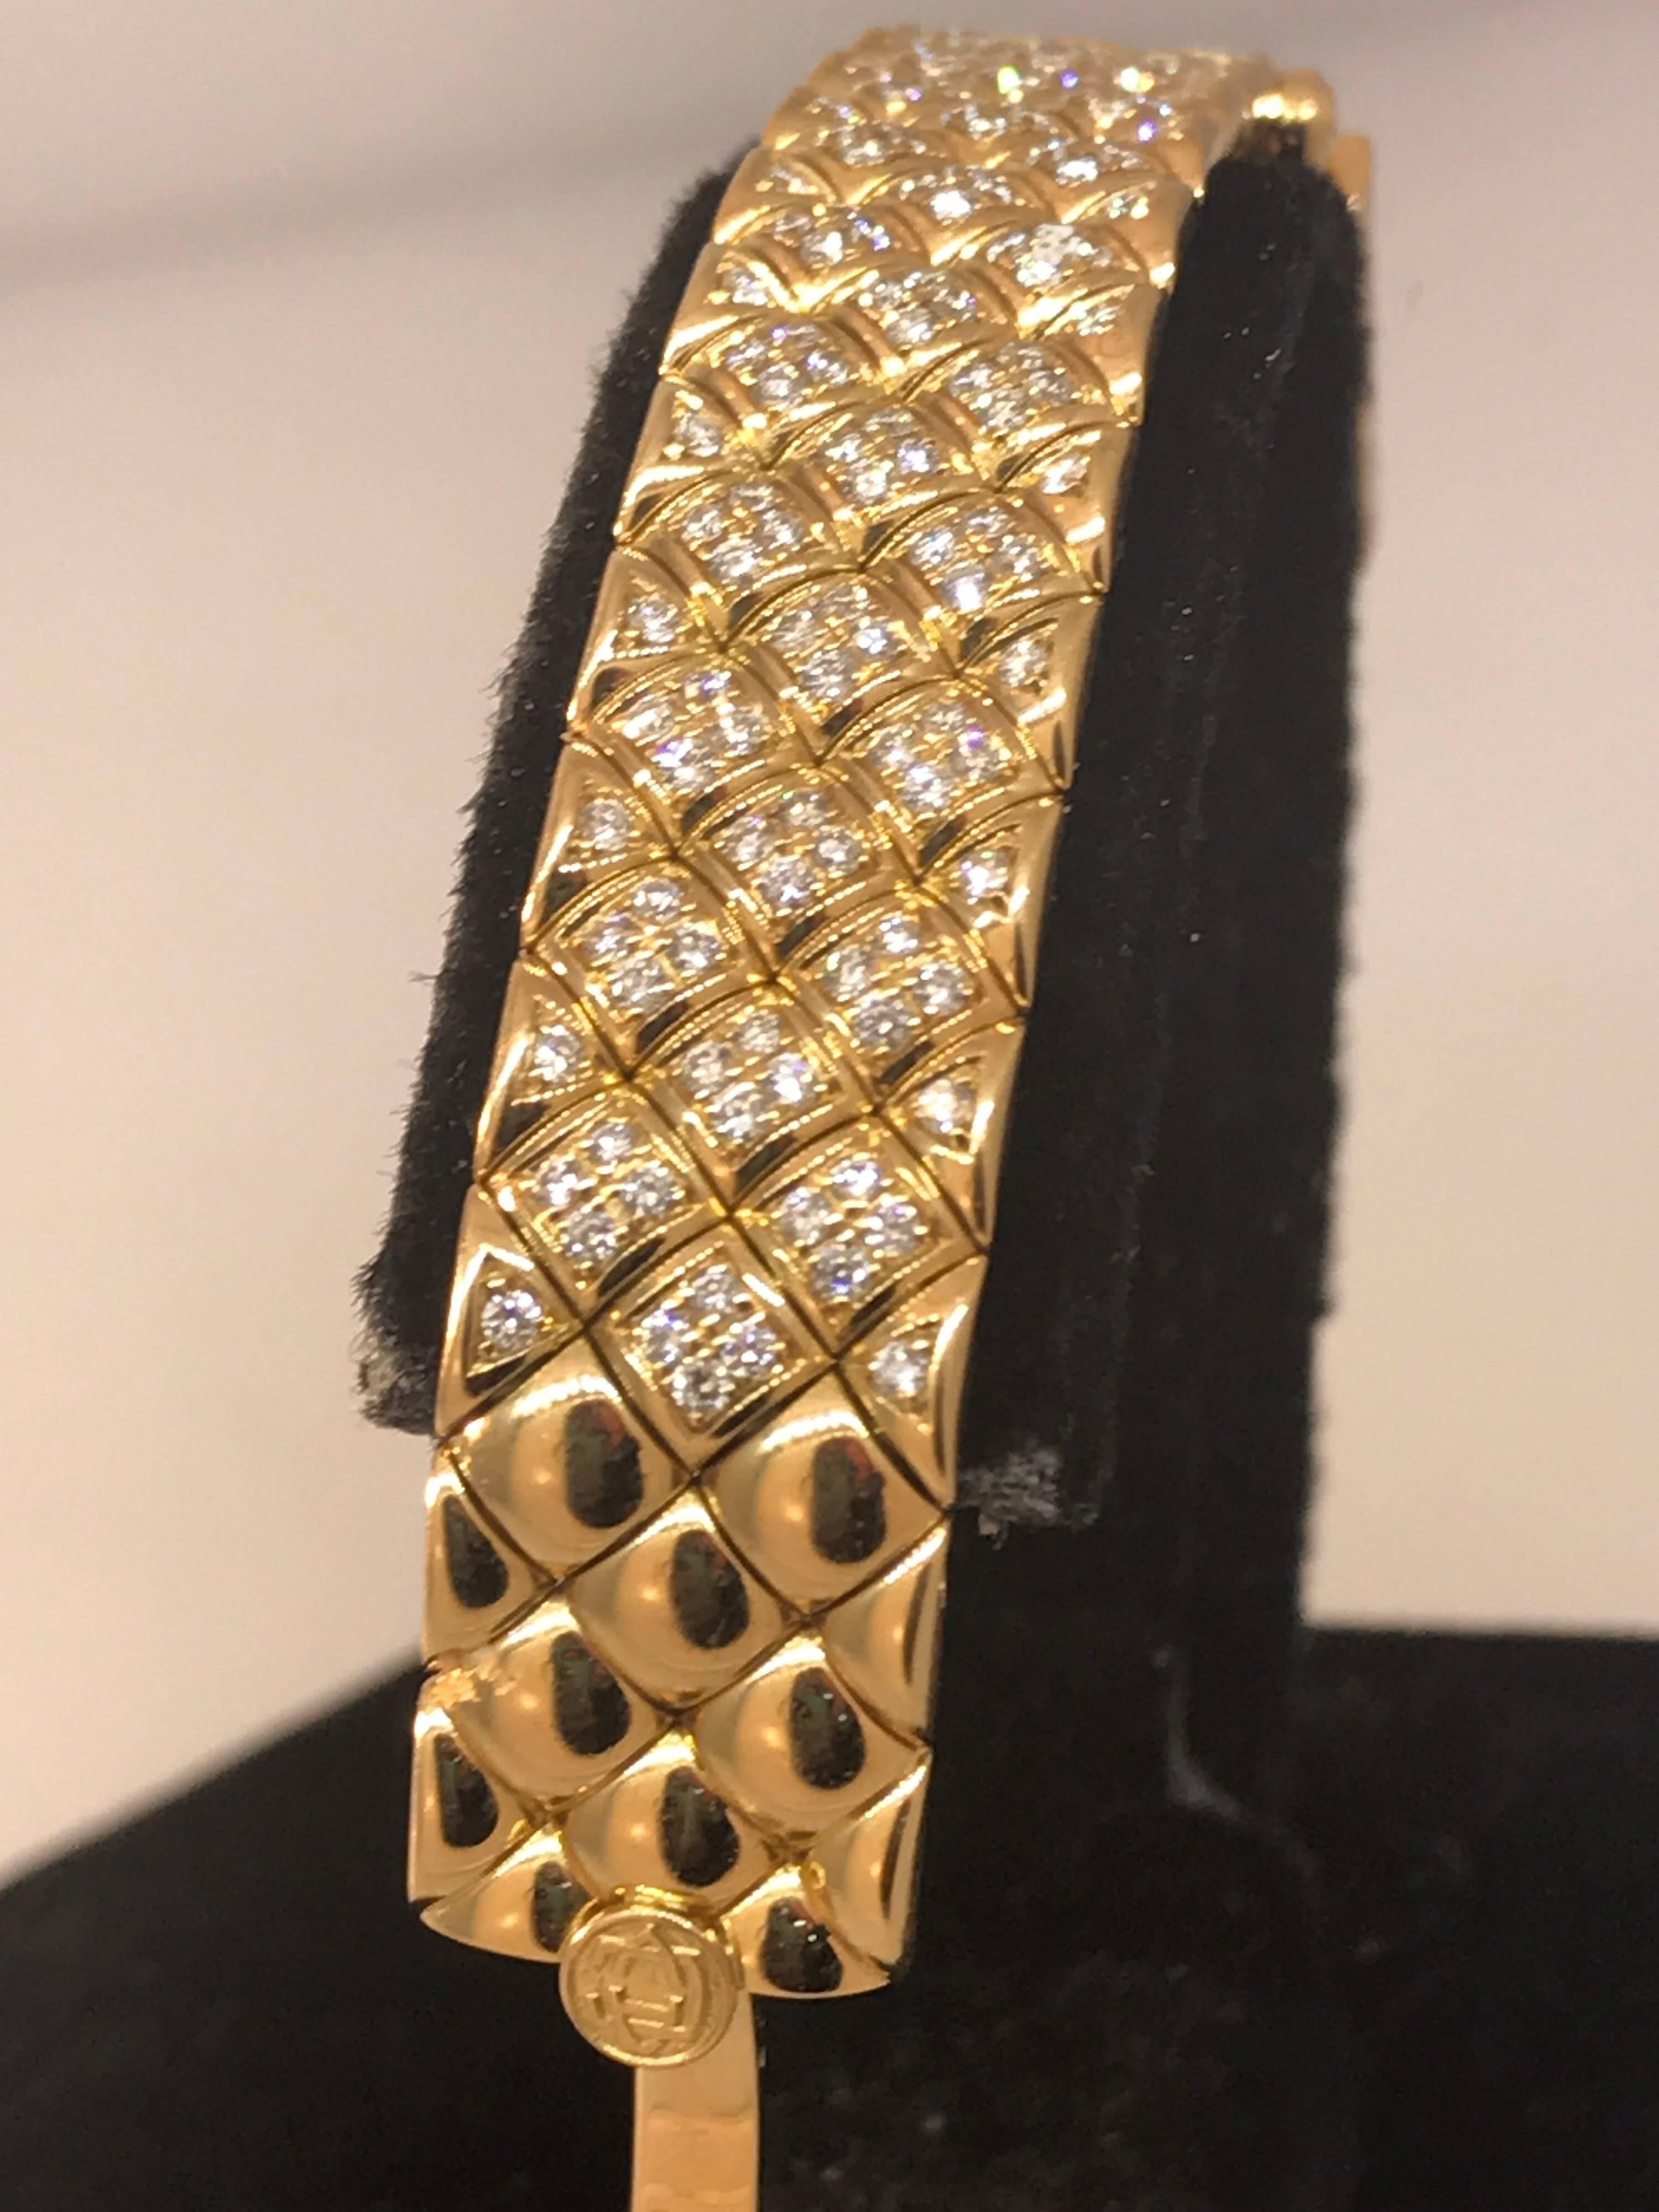 Van Cleef & Arpels Classique Yellow Gold Pave Diamond Bracelet Ladies Watch In Excellent Condition For Sale In New York, NY